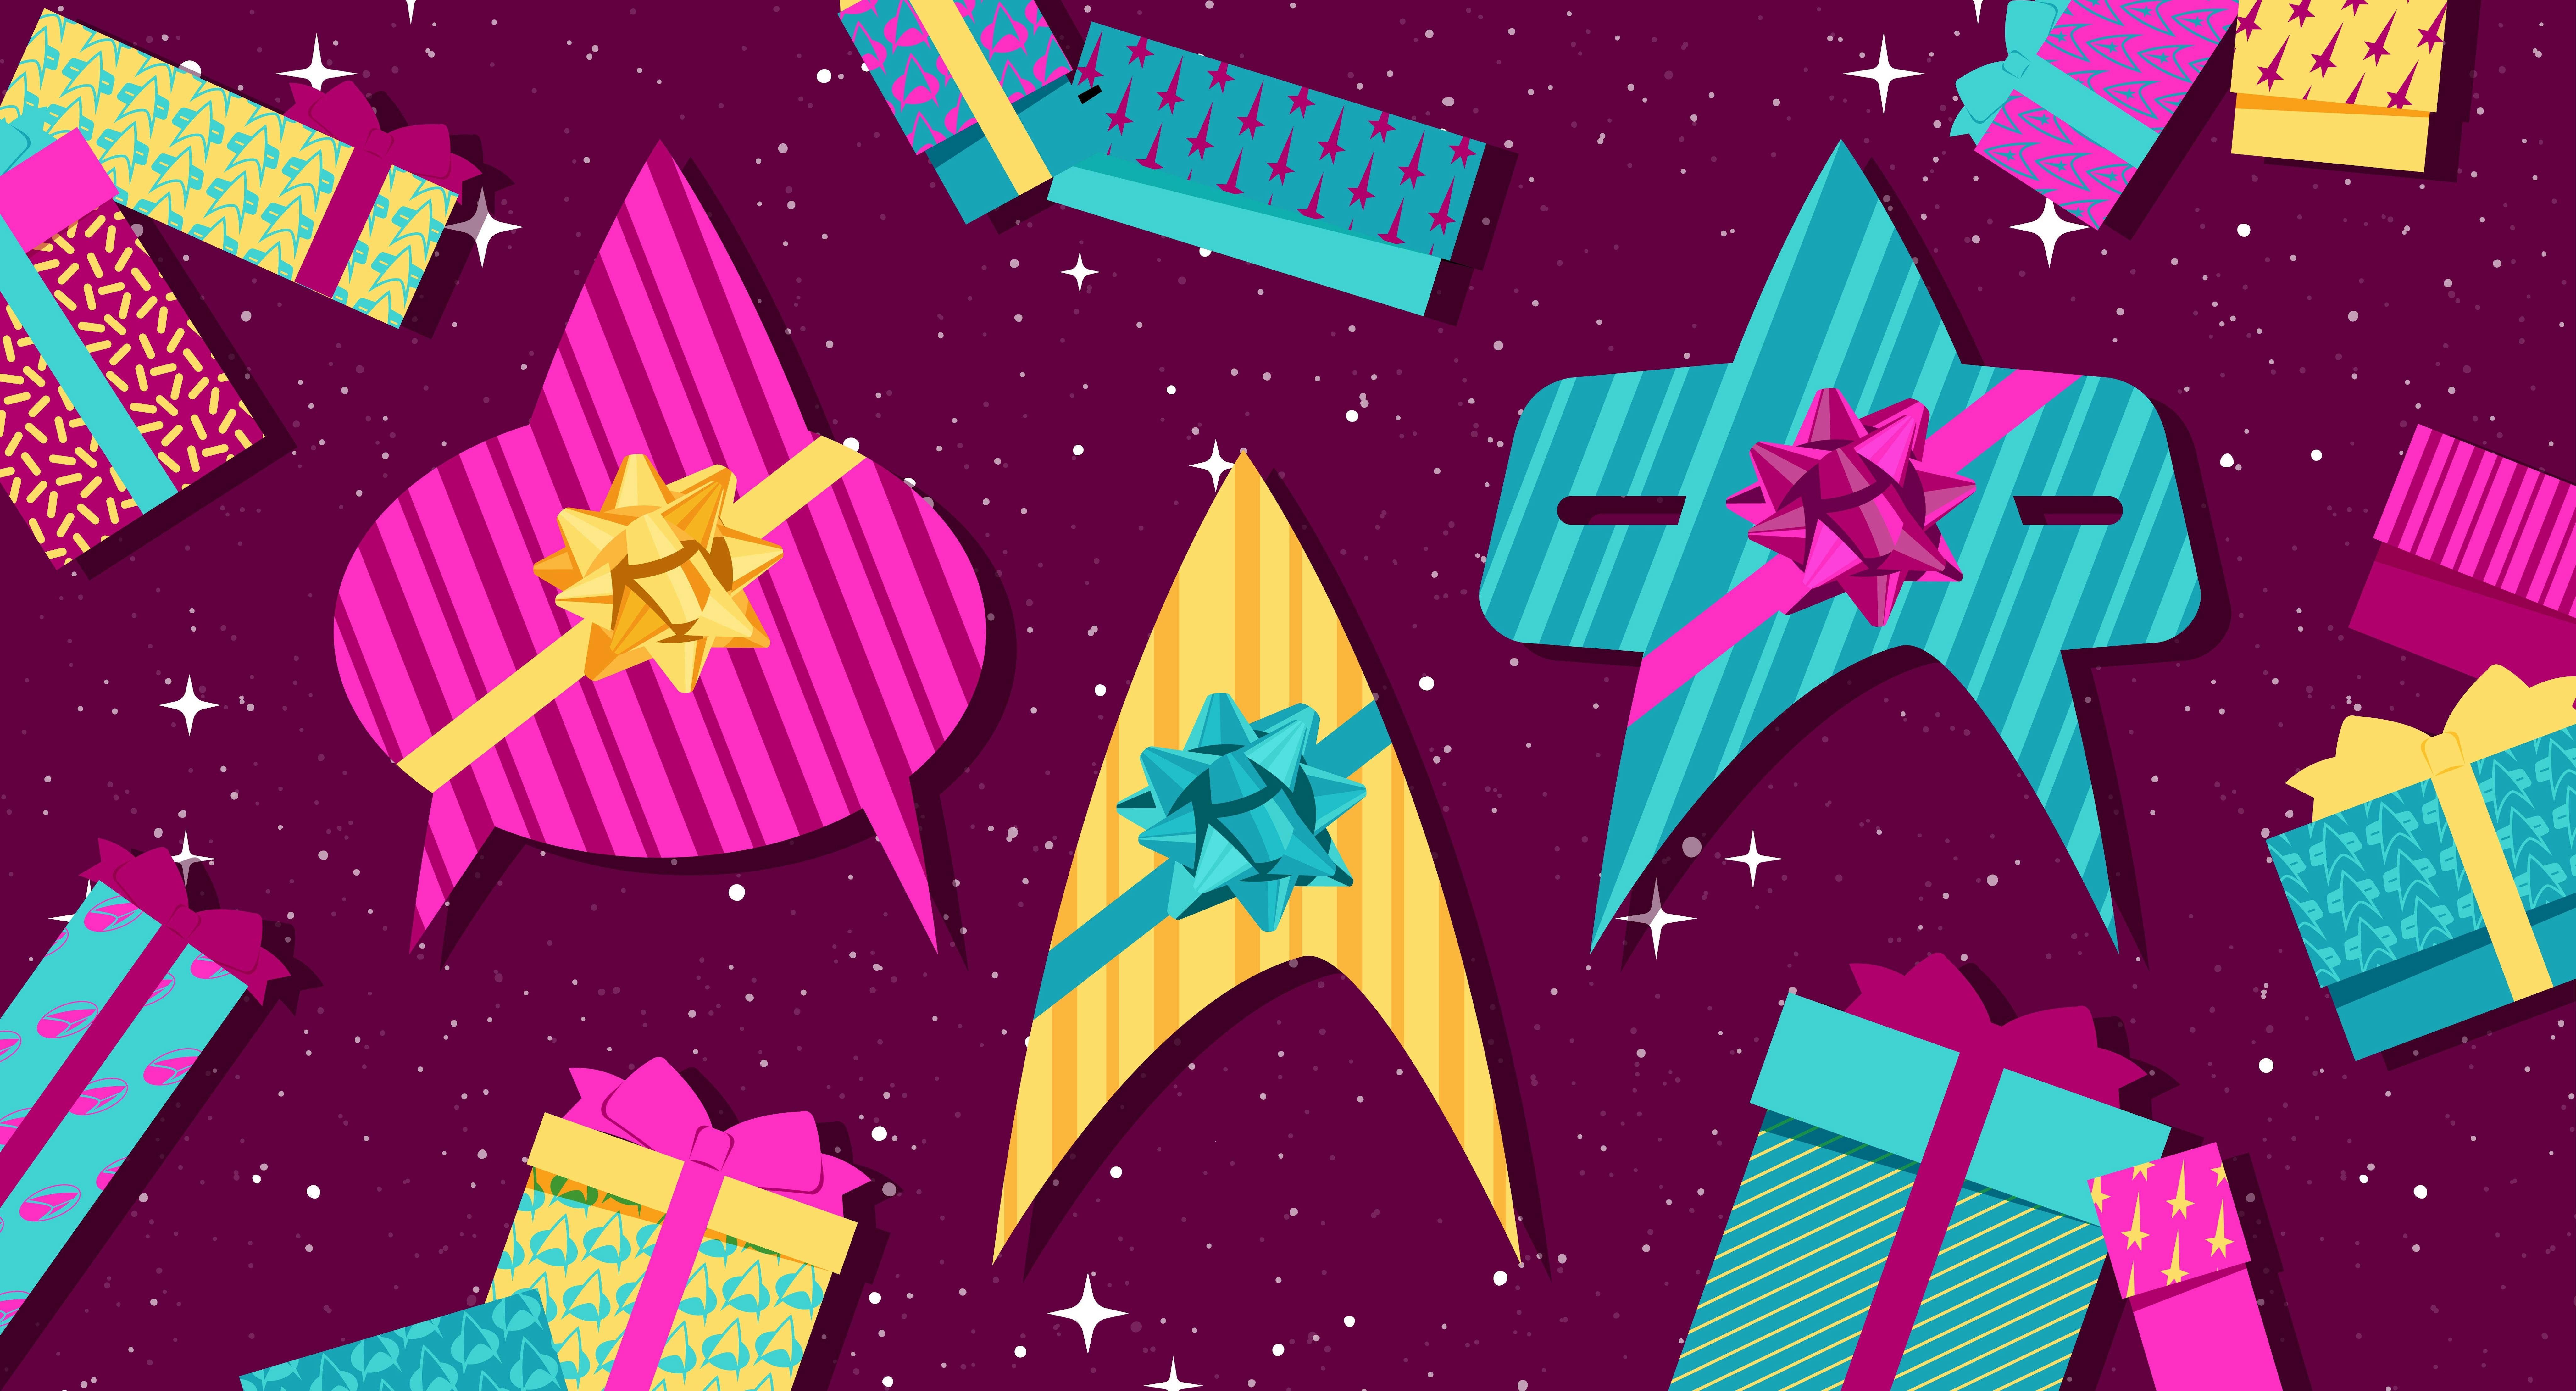 Illustrated banner of Star Trek deltas wrapped as presents